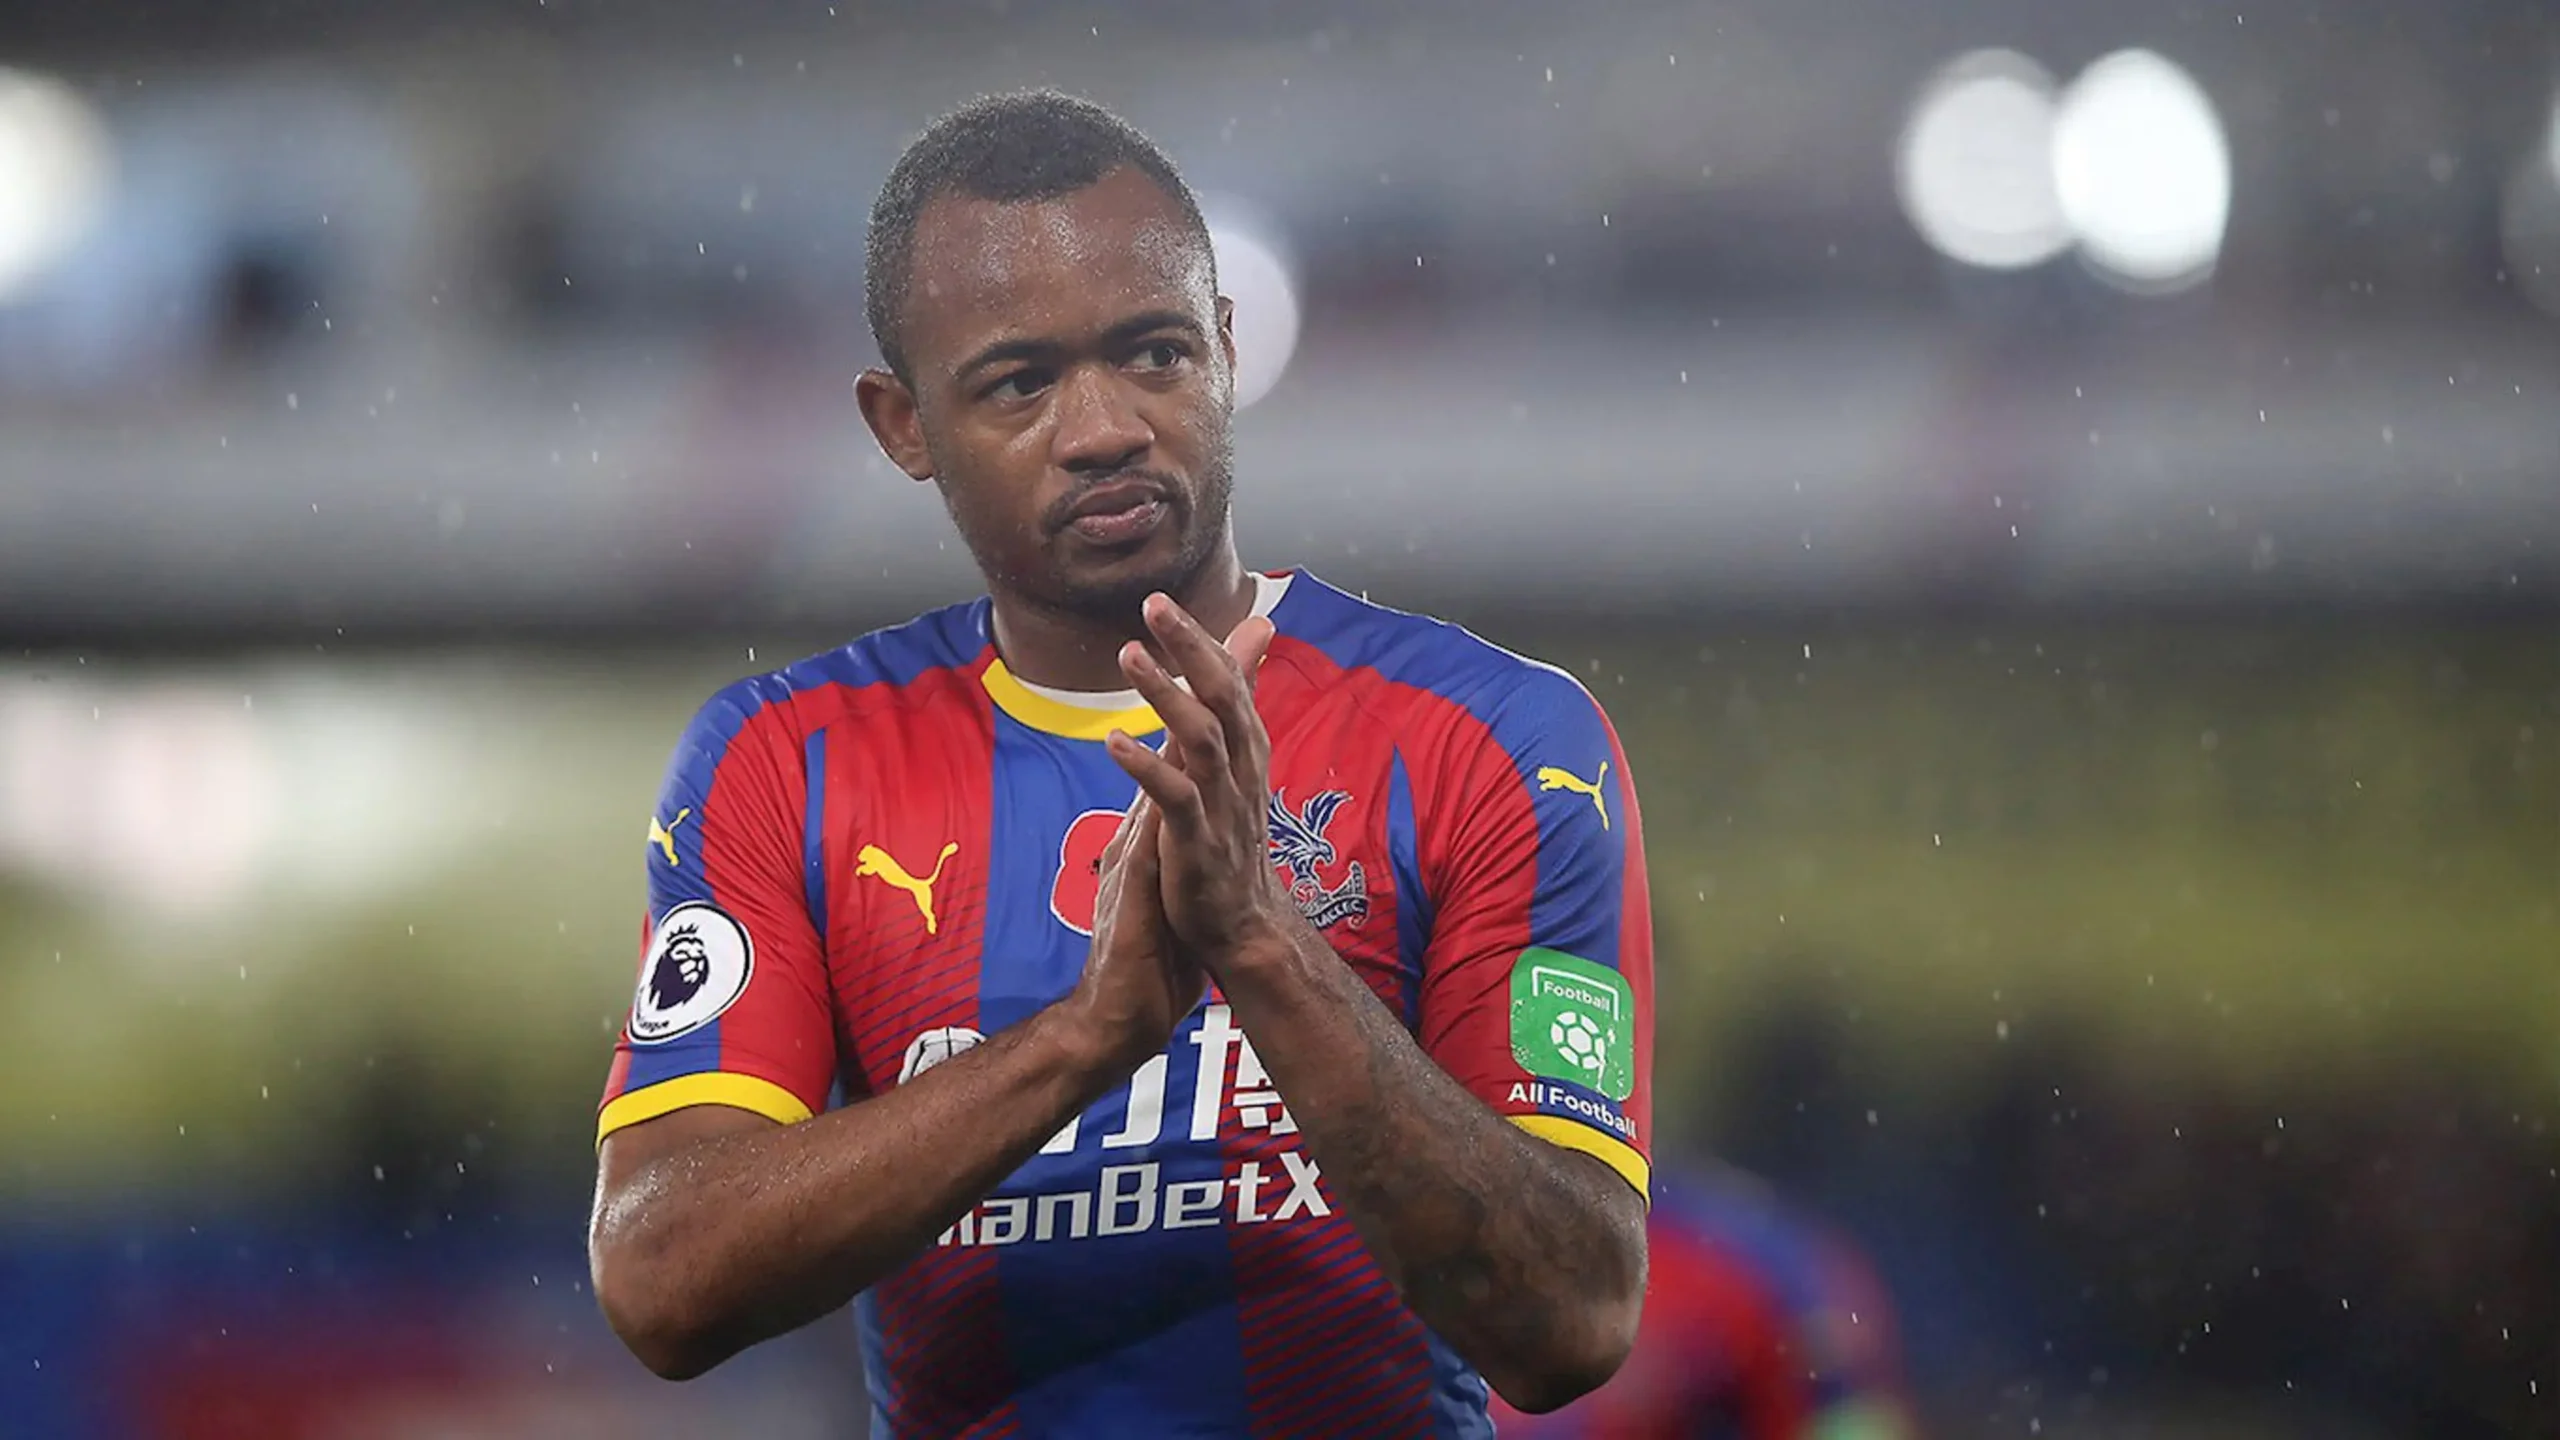 Jordan Ayew is the player with the most dribbles completed in the Premier League this season